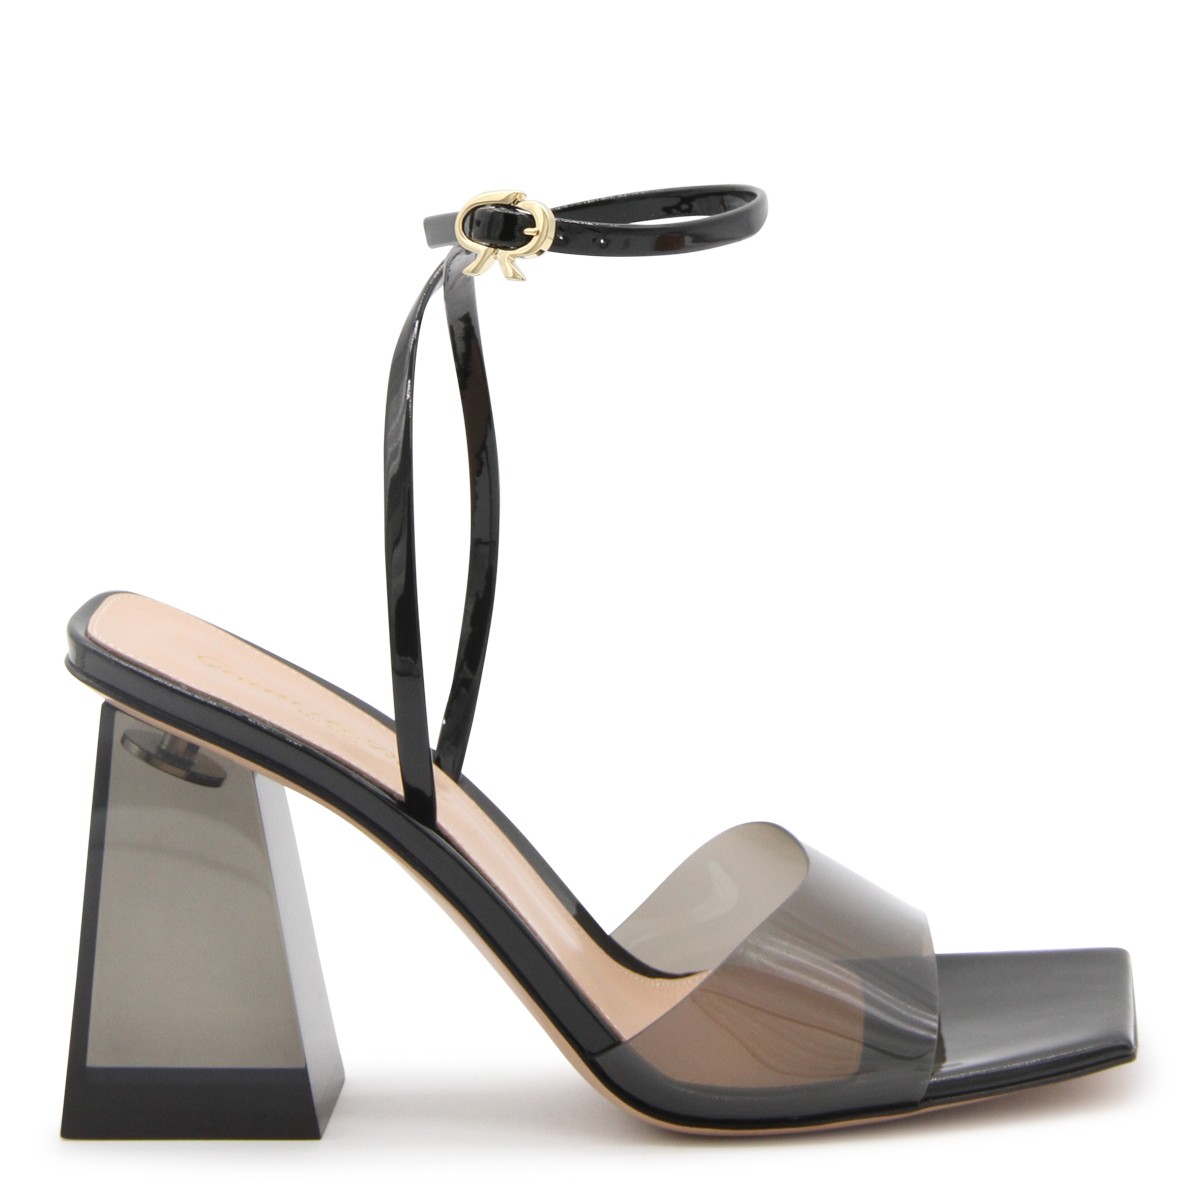 FUME' AND BLACK LEATHER COSMIC SANDALS 